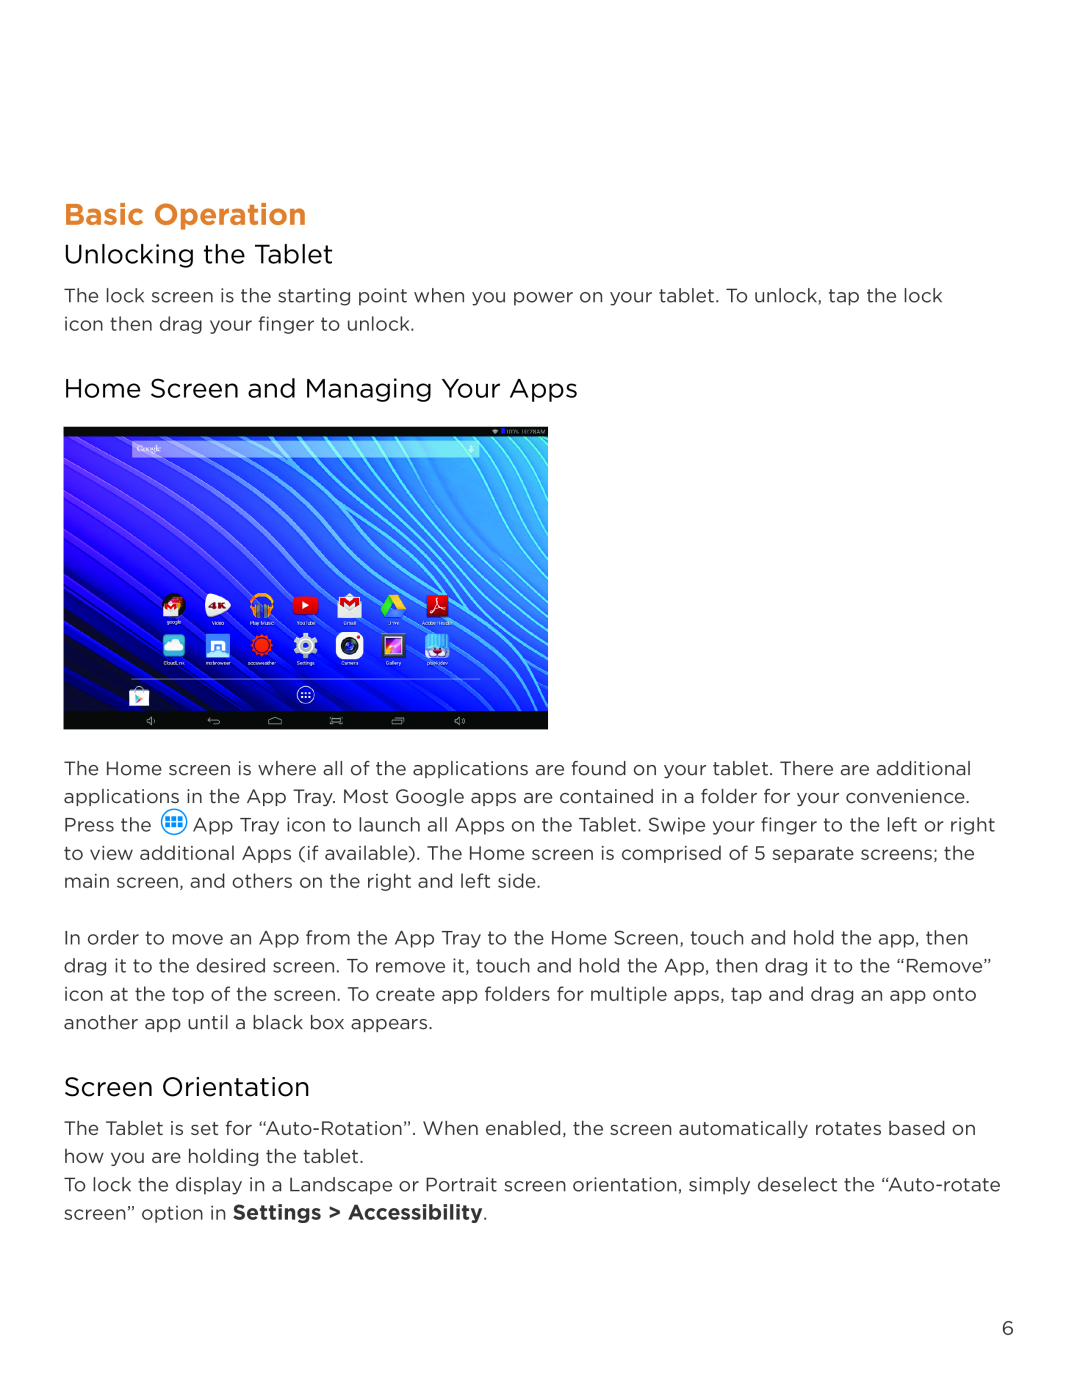 NuVision TM1218 user manual Basic Operation, Unlocking the Tablet, Home Screen and Managing Your Apps, Screen Orientation 